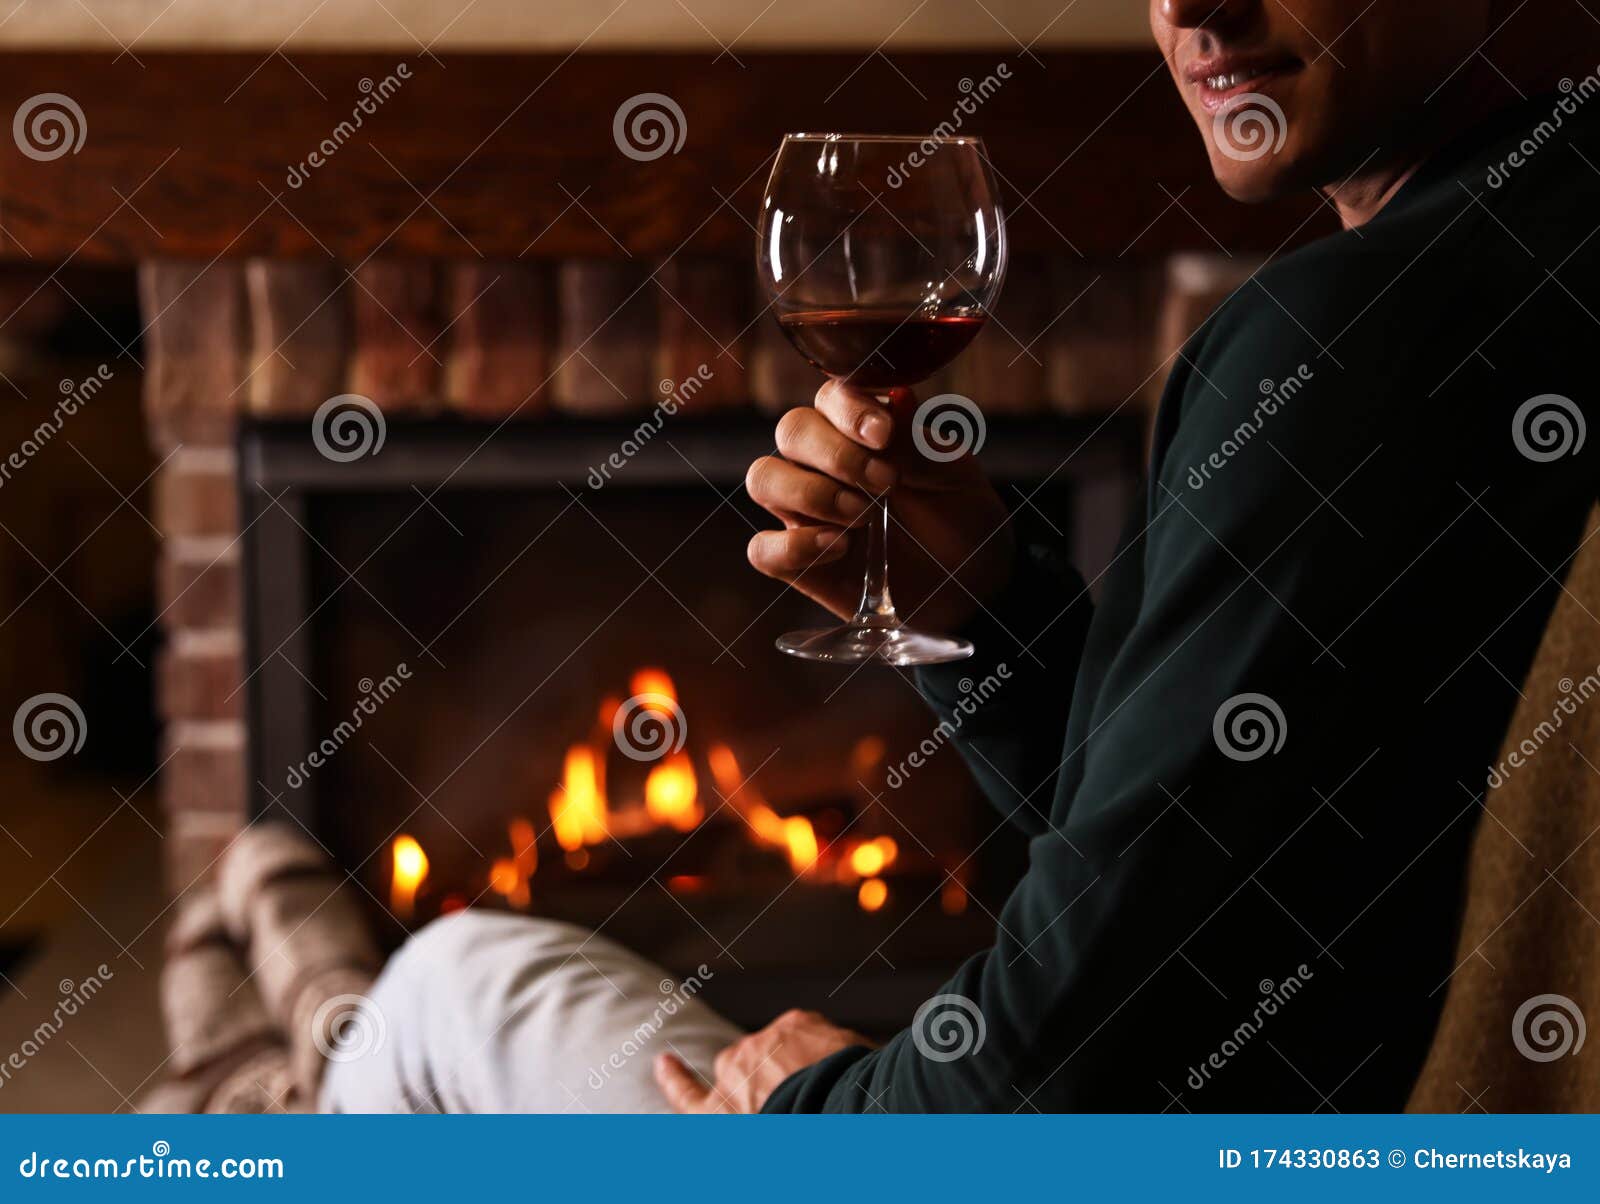 Man with Glass of Wine Near Fireplace at Home Stock Image - Image of ...